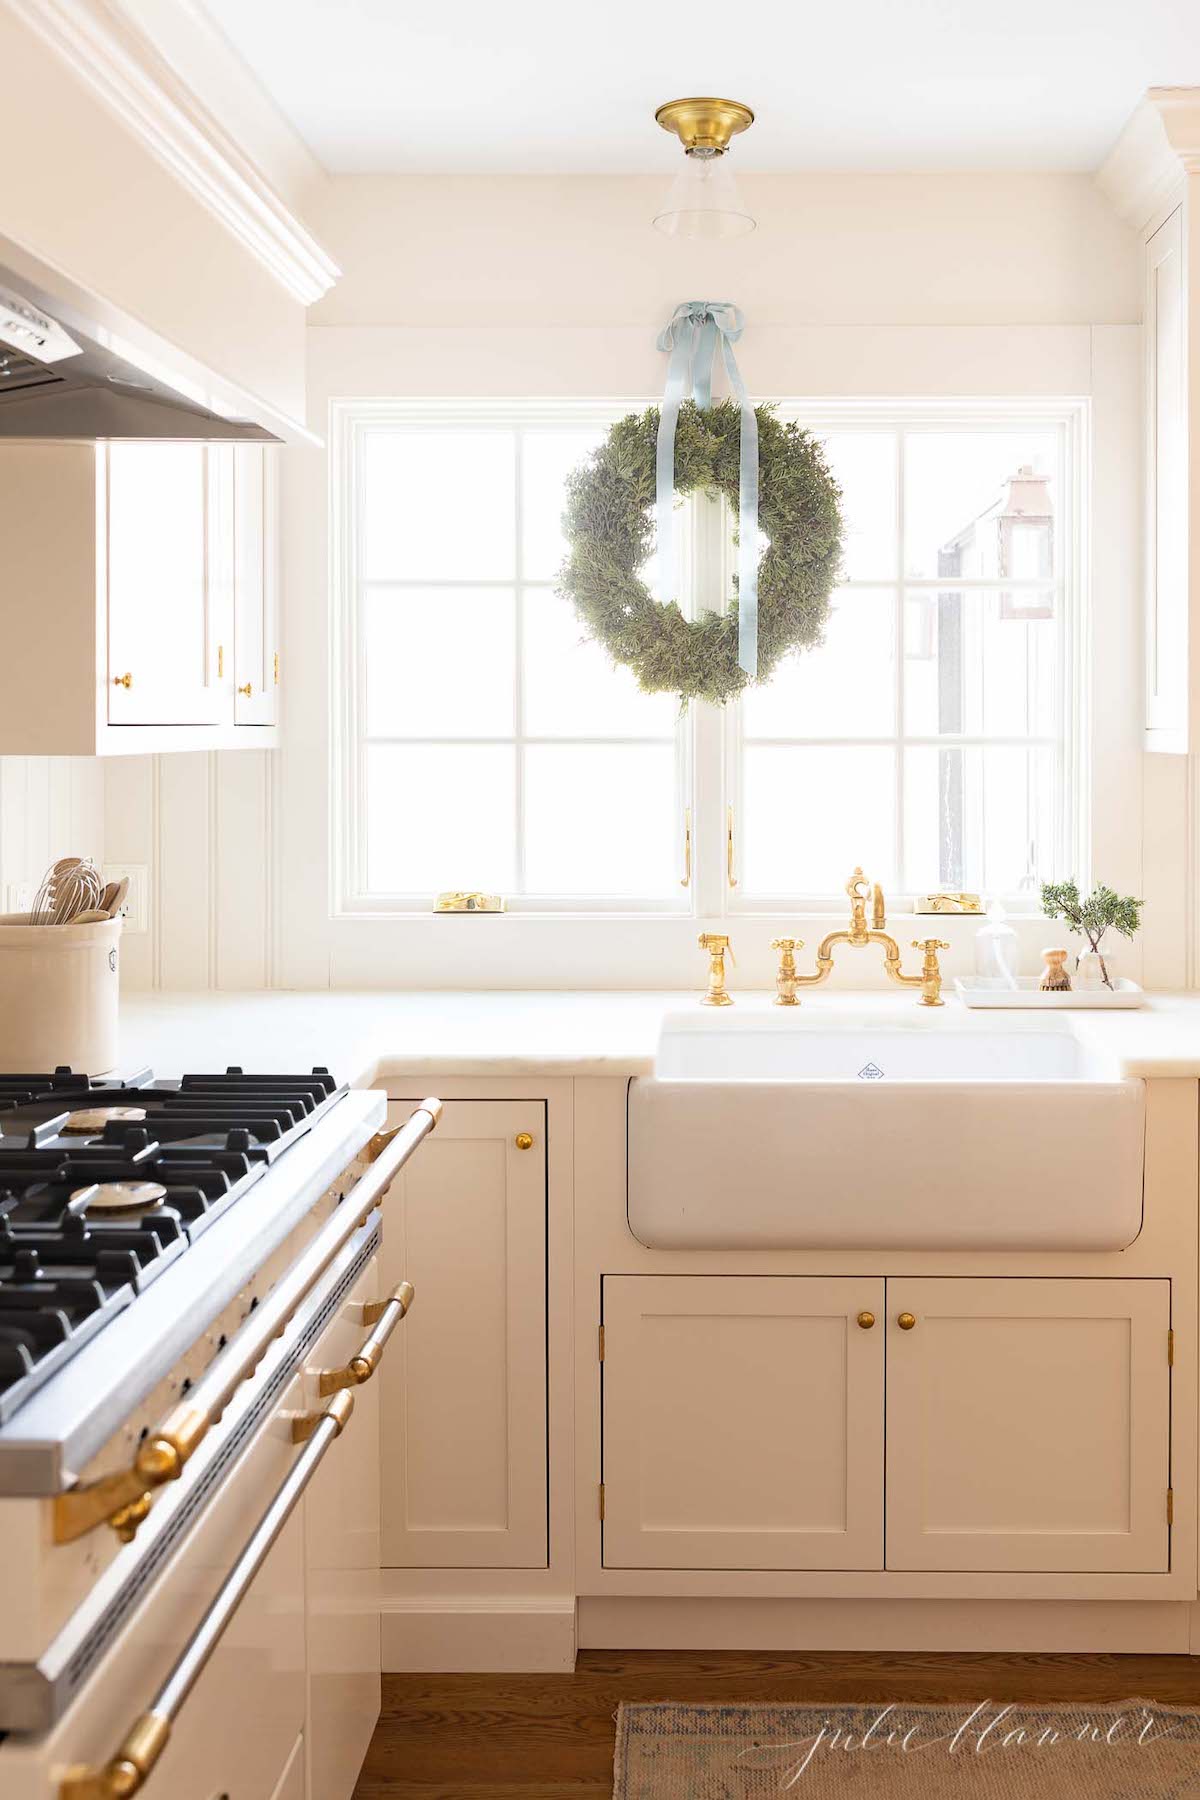 A white kitchen with gold accents and a wreath hanging over the sink, adorned with blue Christmas decorations.